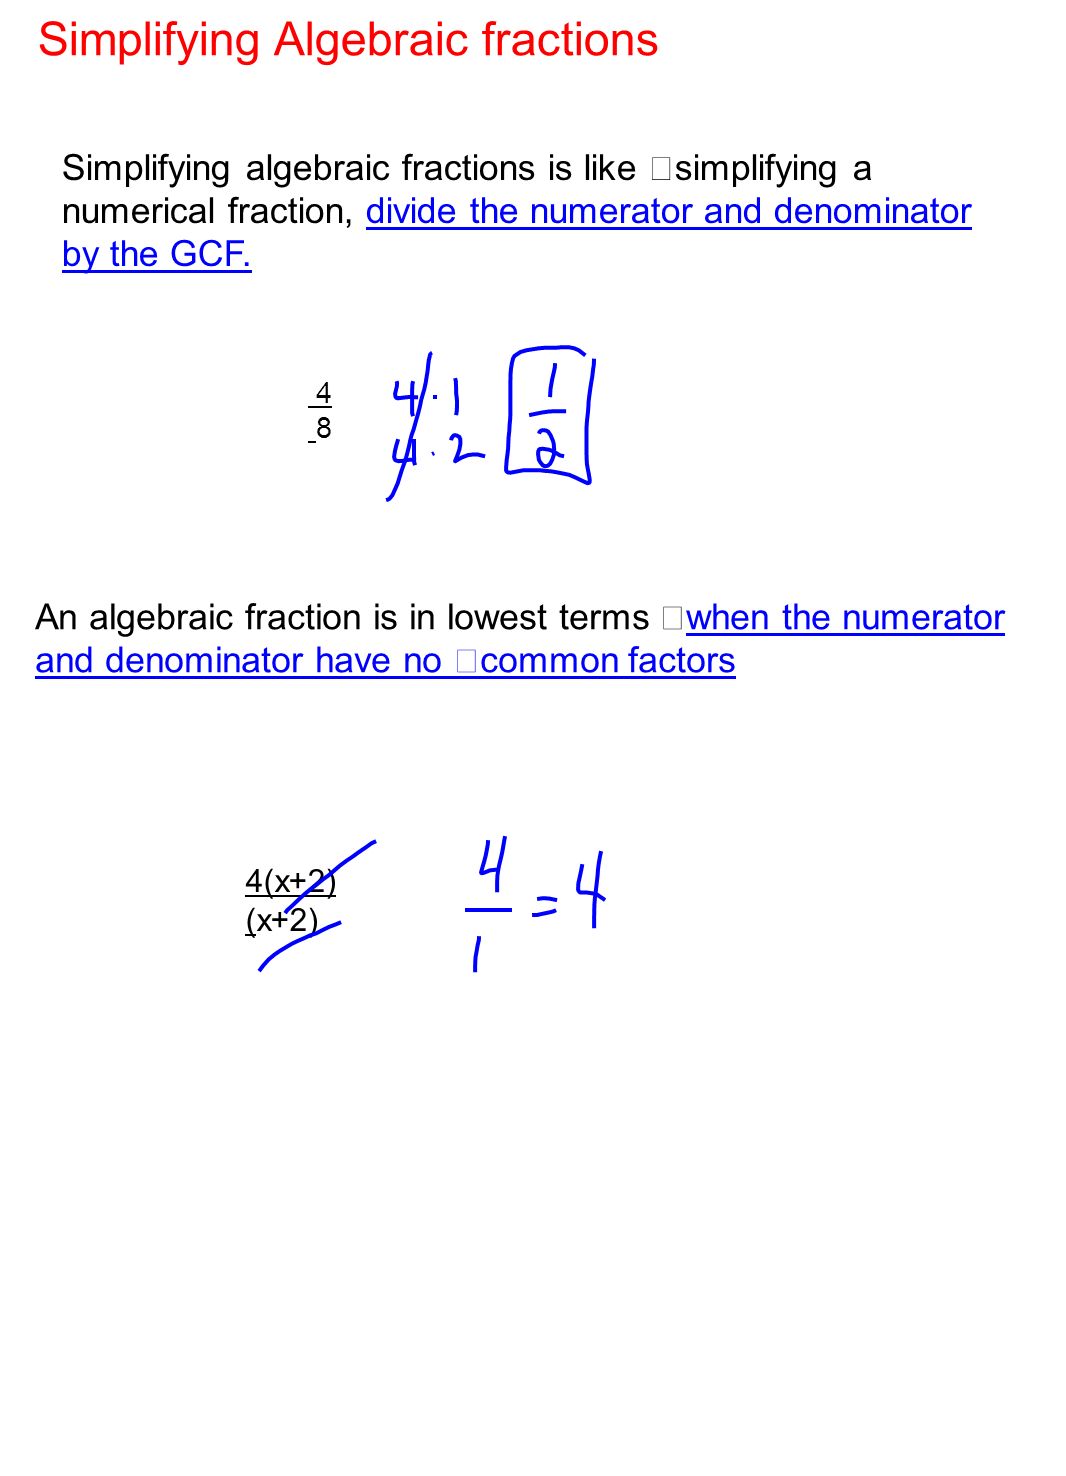 Simplifying algebraic fractions is like simplifying a numerical fraction, divide the numerator and denominator by the GCF.